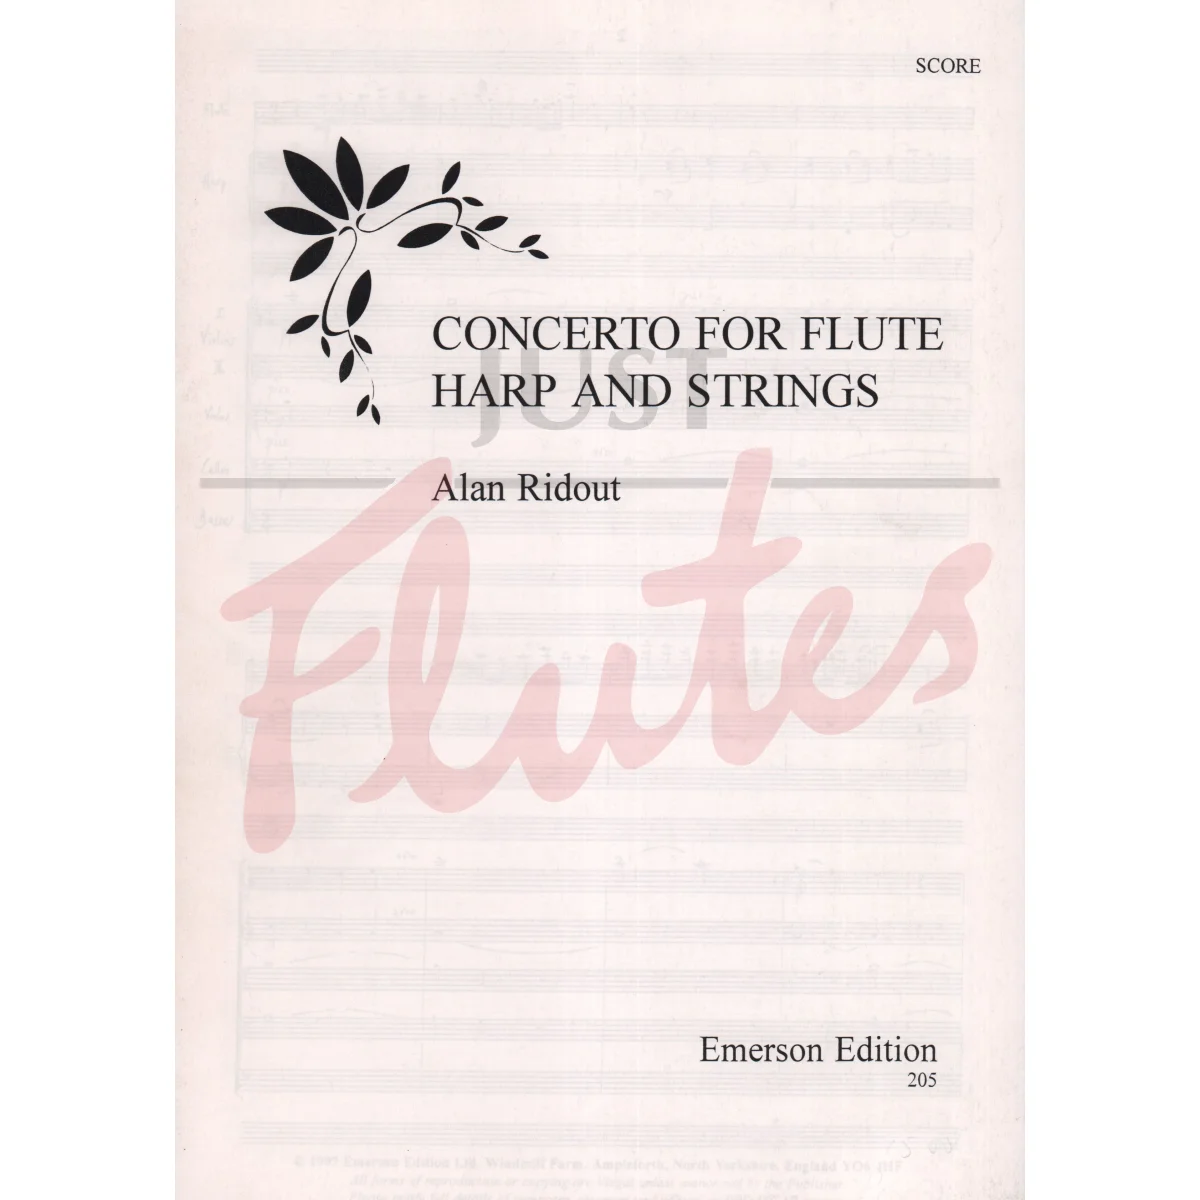 Concerto for Flute, Harp and Strings